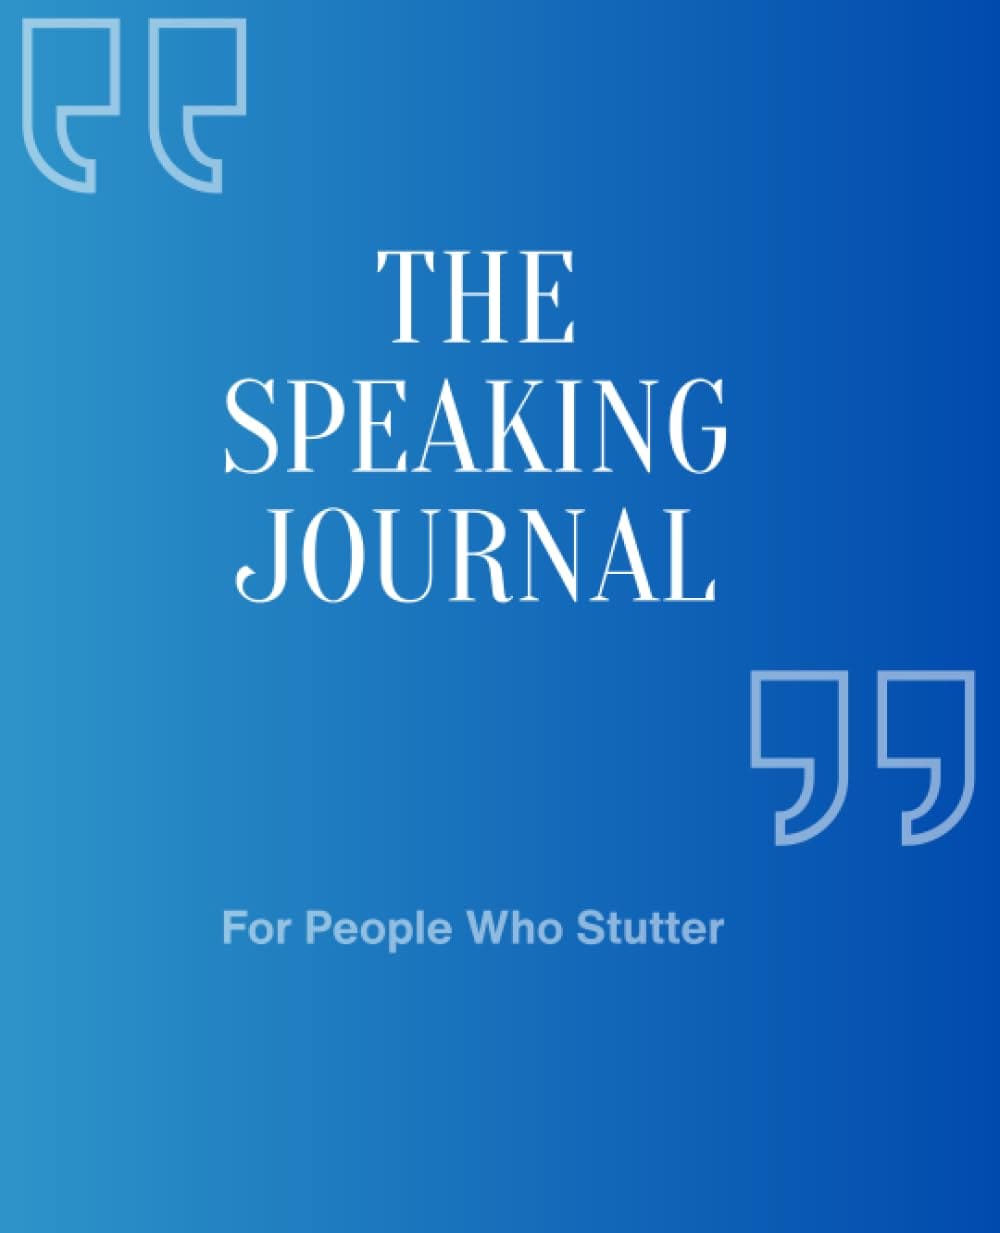 the speaking journal for people who stutter blue book cover